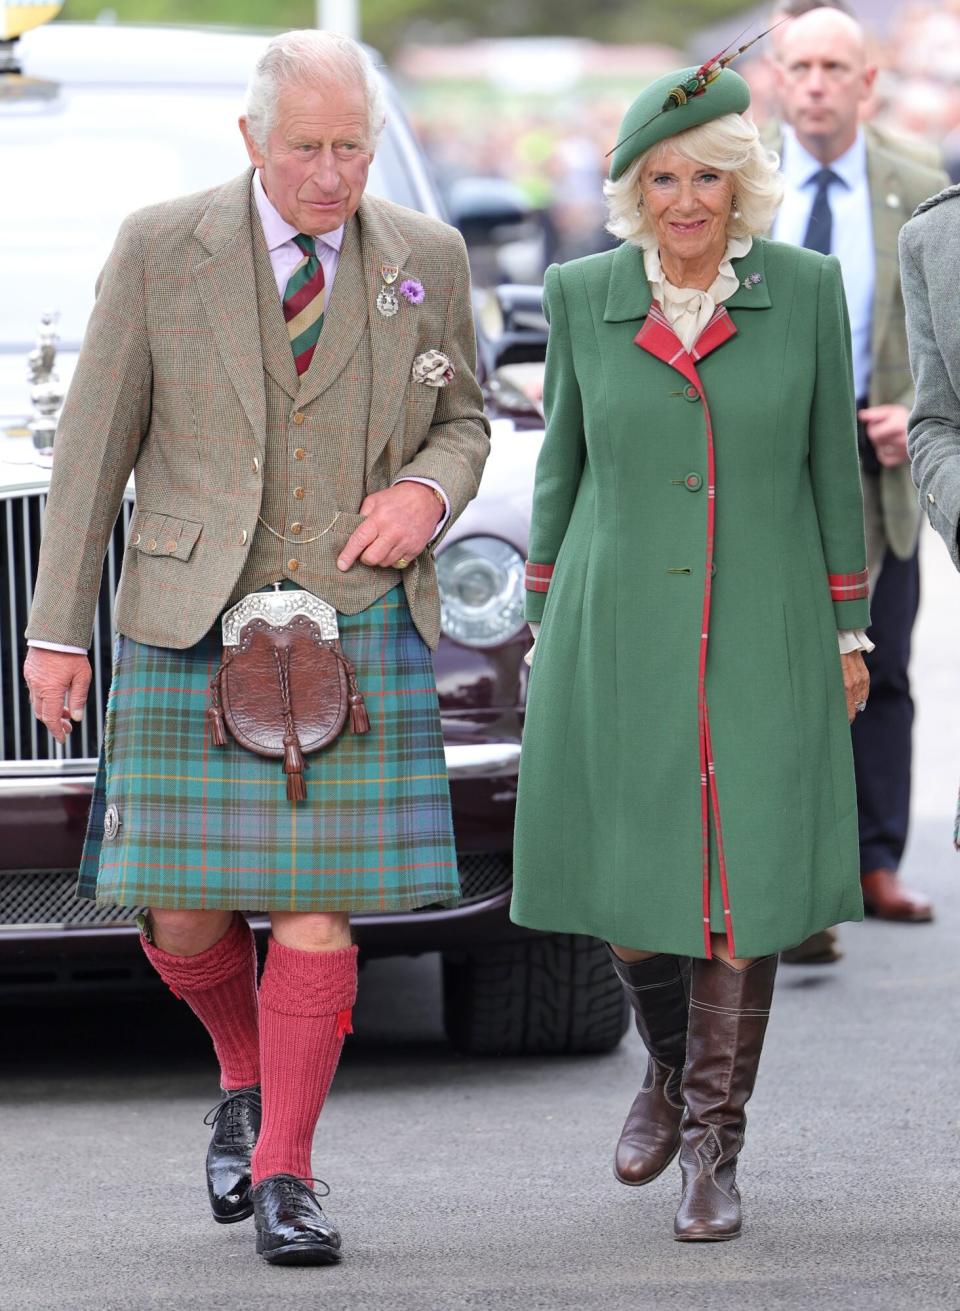 BRAEMAR, SCOTLAND - SEPTEMBER 03: Prince Charles, Prince of Wales, known as the Duke of Rothesay when in Scotland and Camilla, Duchess of Cornwall attend the Braemar Highland Gathering at the Princess Royal & Duke of Fife Memorial Park on September 03, 2022 in Braemar, Scotland. The Braemar Gathering is the most famous of the Highland Games and is known worldwide. Each year thousands of visitors descend on this small Scottish village on the first Saturday in September to watch one of the more colourful Scottish traditions. The Gathering has a long history and in its modern form it stretches back nearly 200 years. The Queen Elizabeth Platinum Jubilee Archway was designed by architect Keith Ross, erected to celebrate 70 years of Her Majesty as monarch and as Patron of The Braemar Royal Highland Society, organiser of the annual Braemar Gathering. (Photo by Chris Jackson/Getty Images)